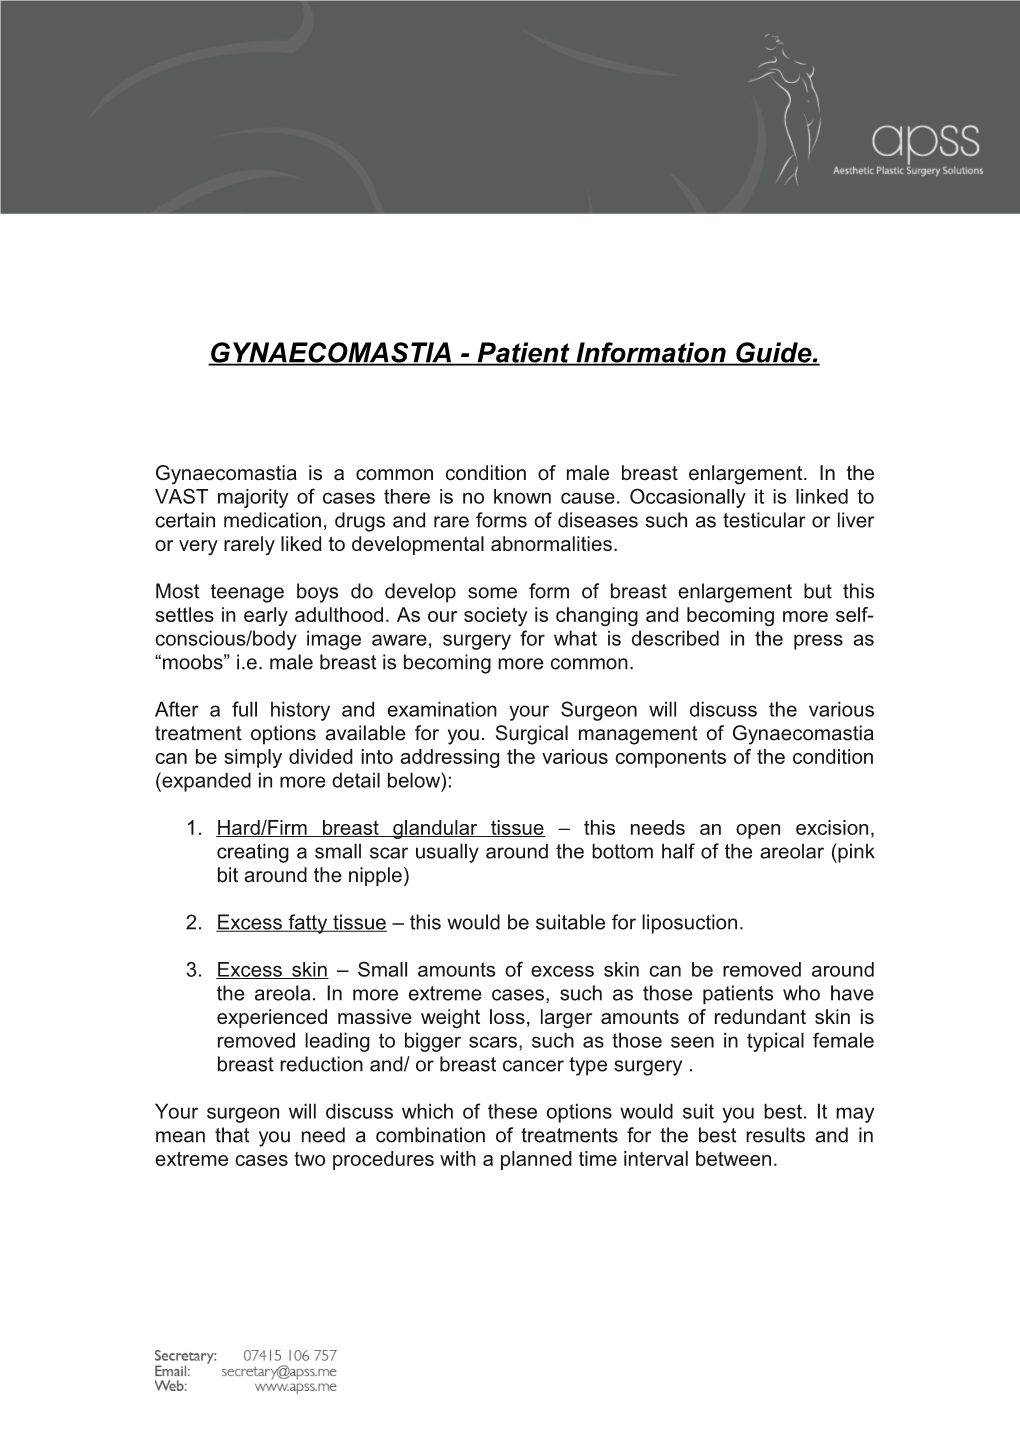 GYNAECOMASTIA - Patient Information Guide